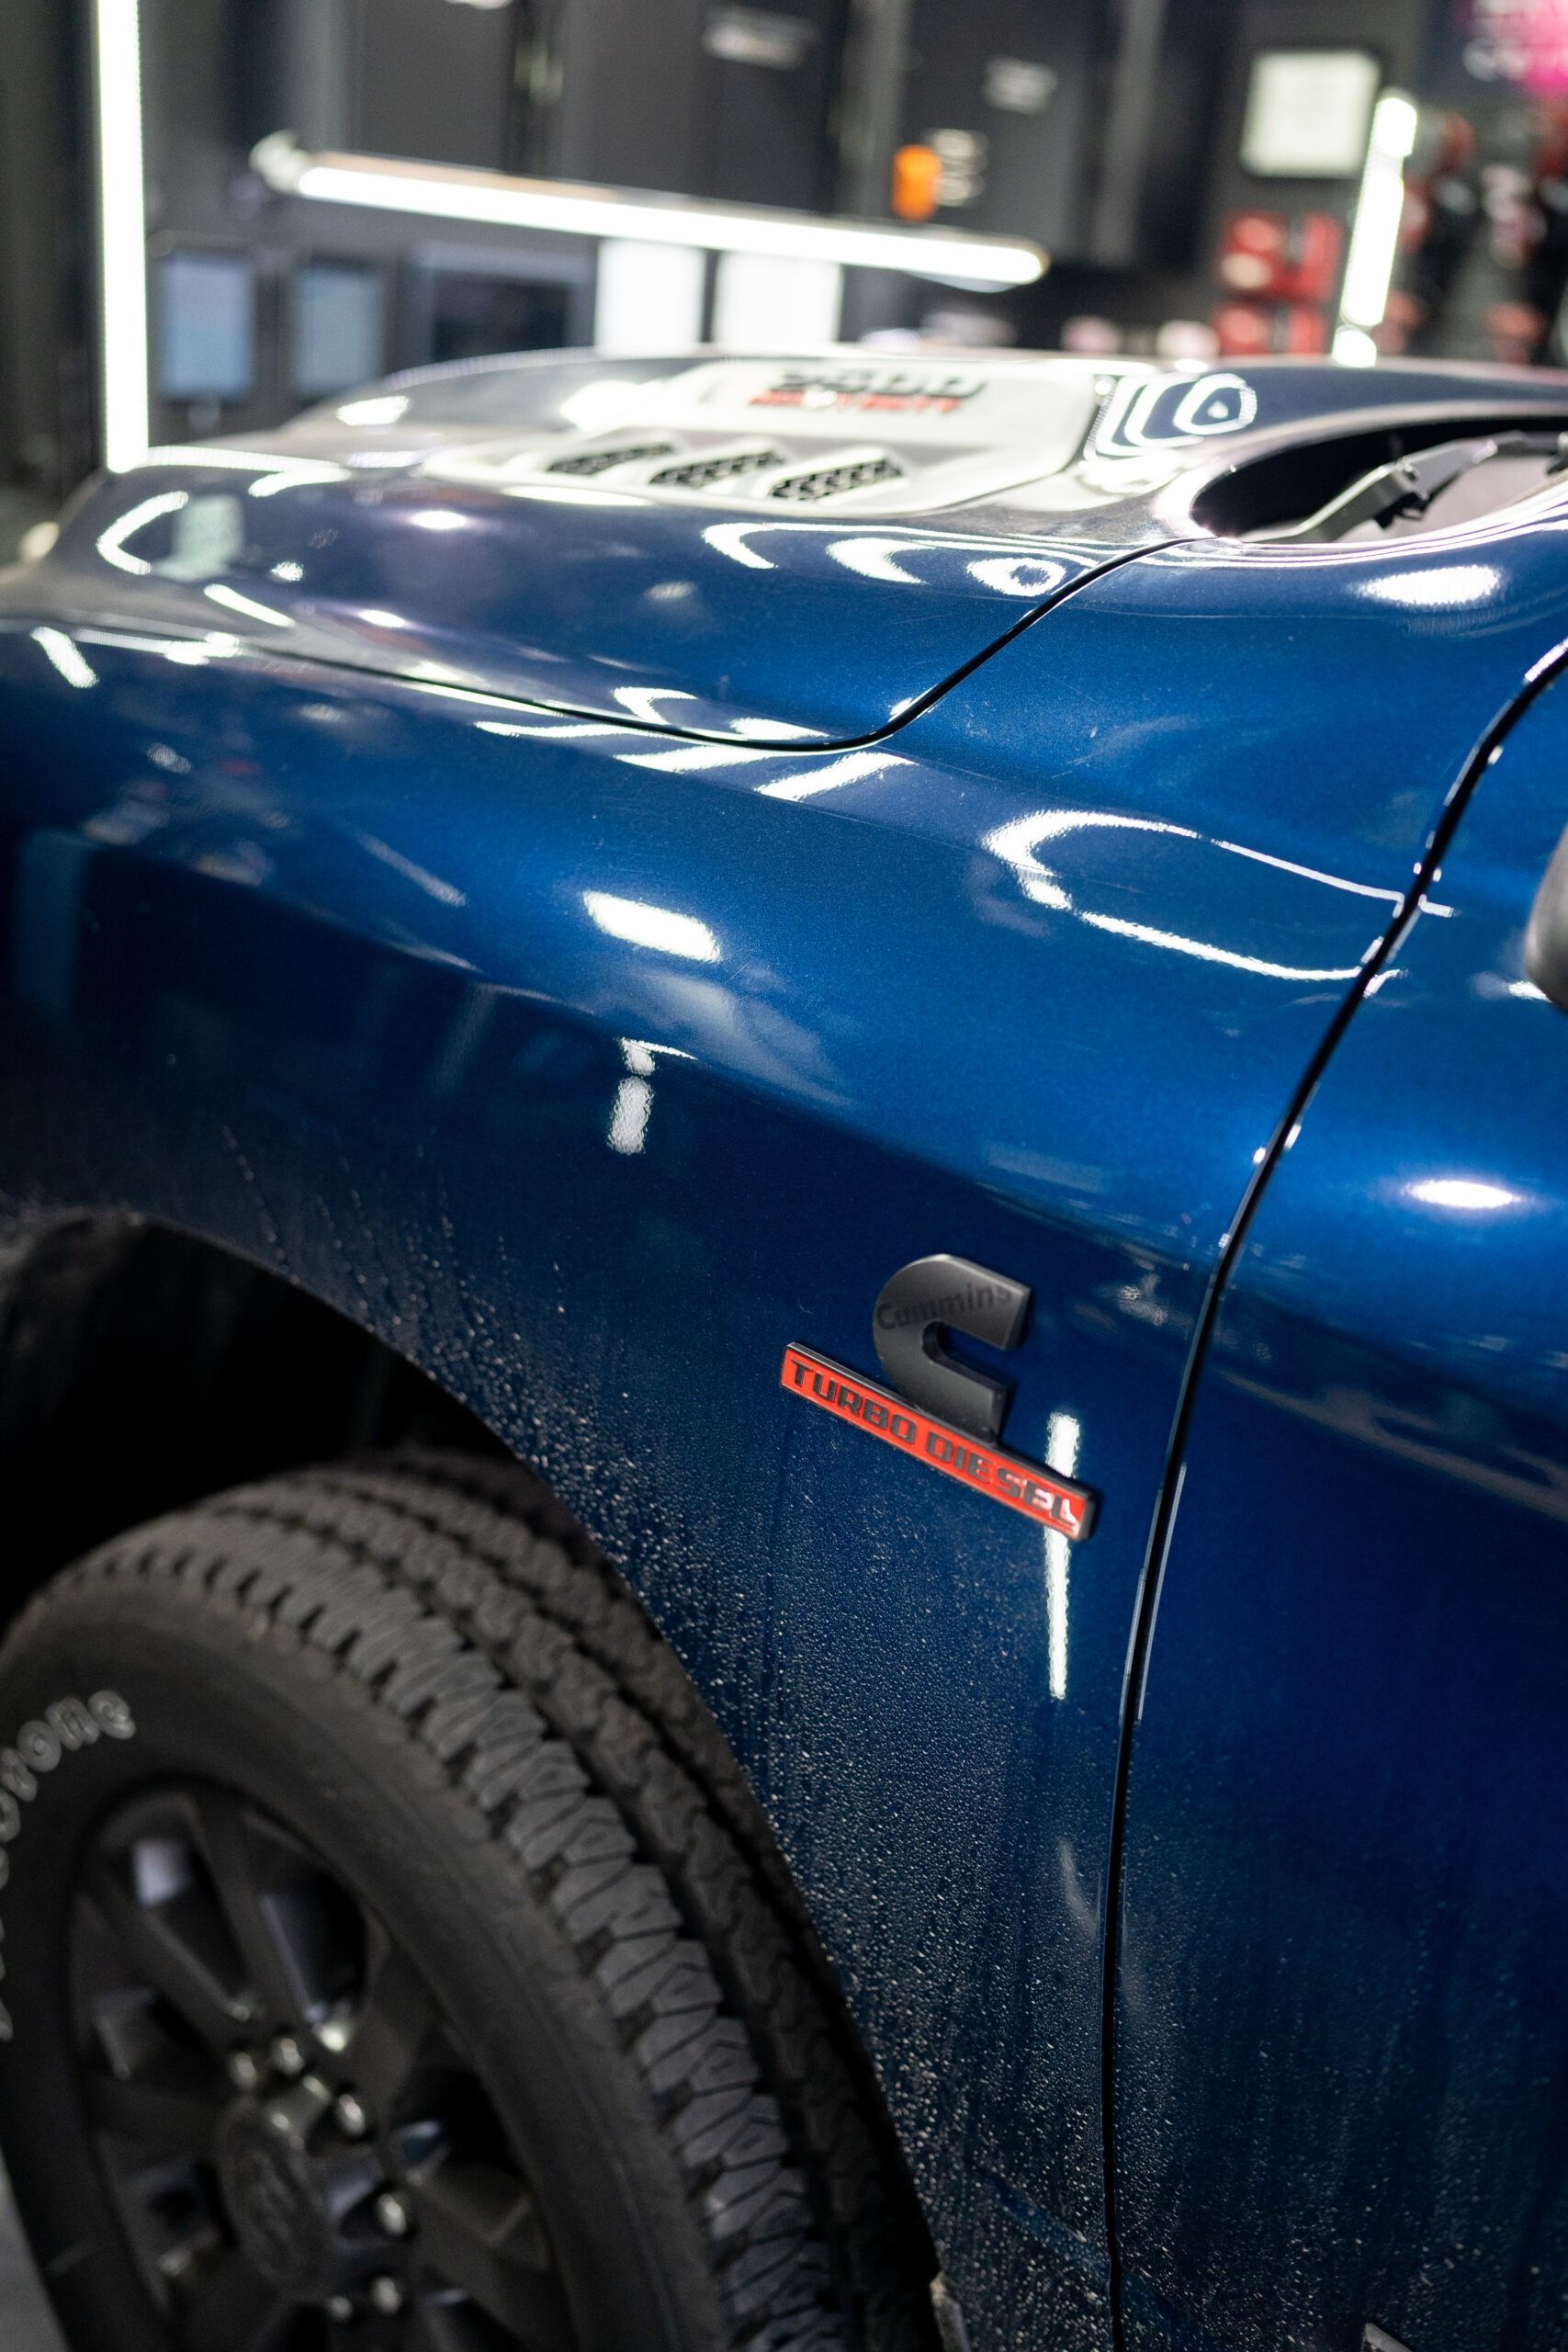 A close up of a blue truck parked in a garage.